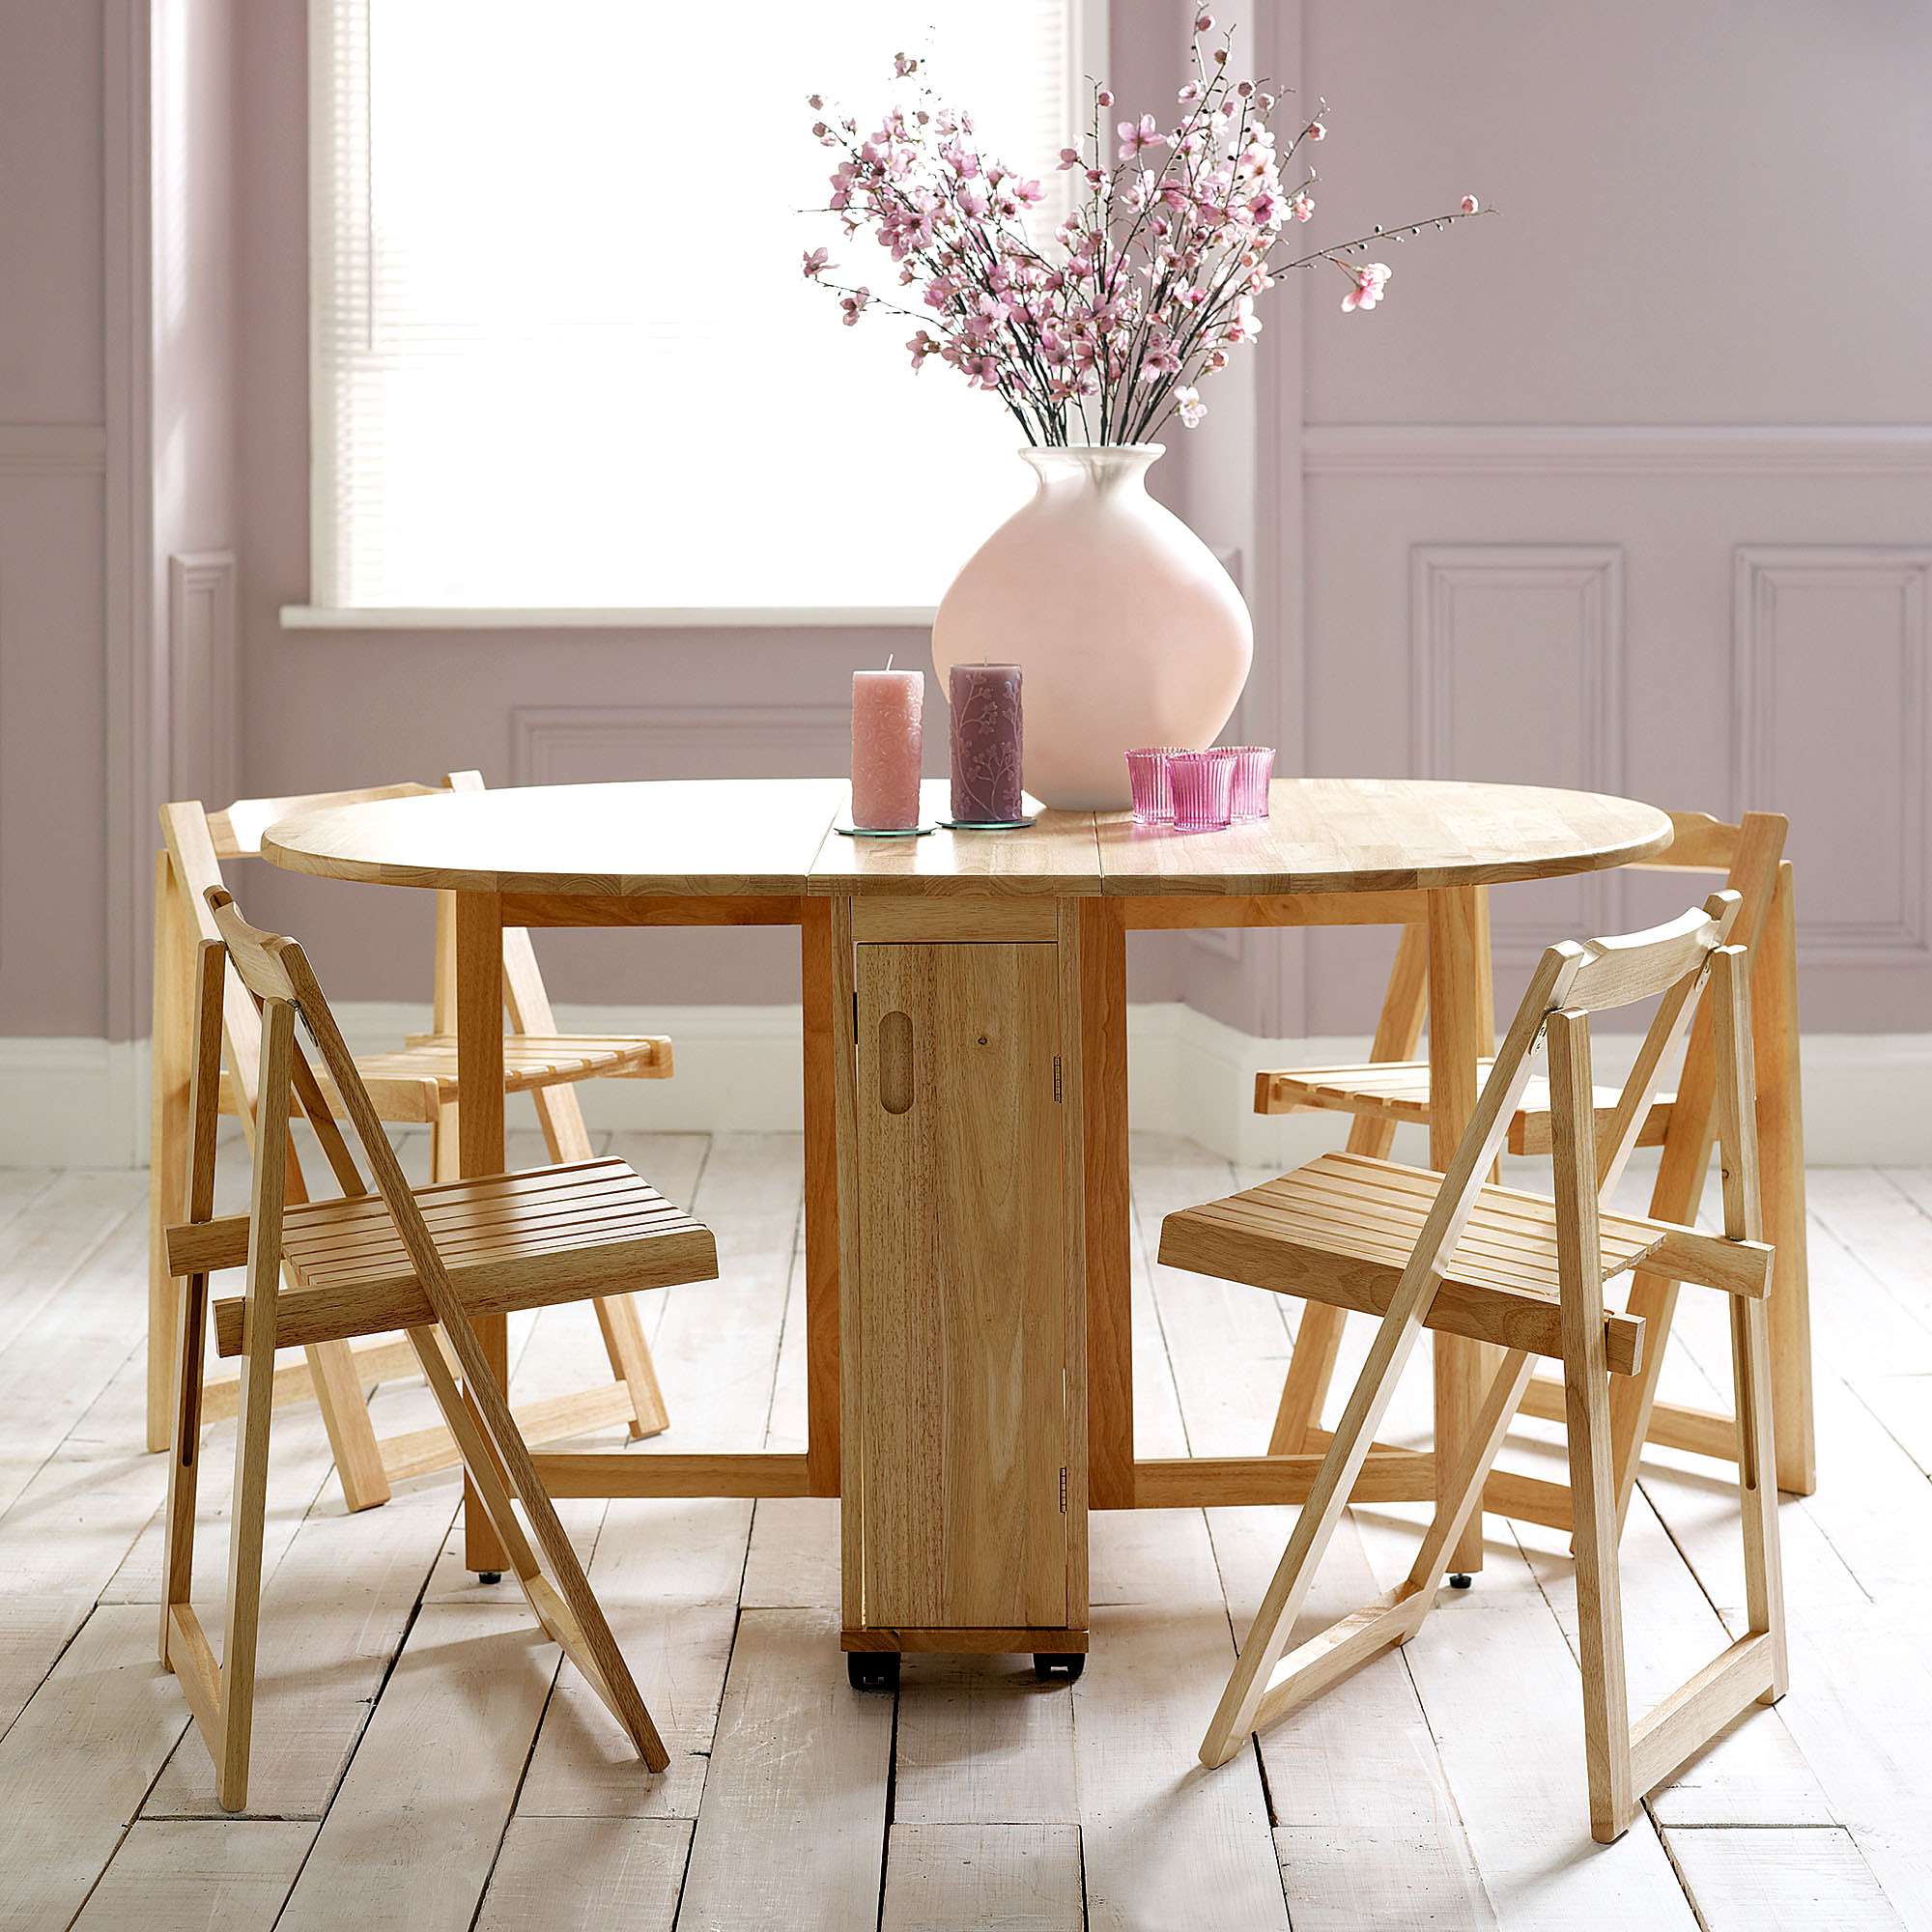 Choose a Folding Dining Table for a Small Space – Adorable Home